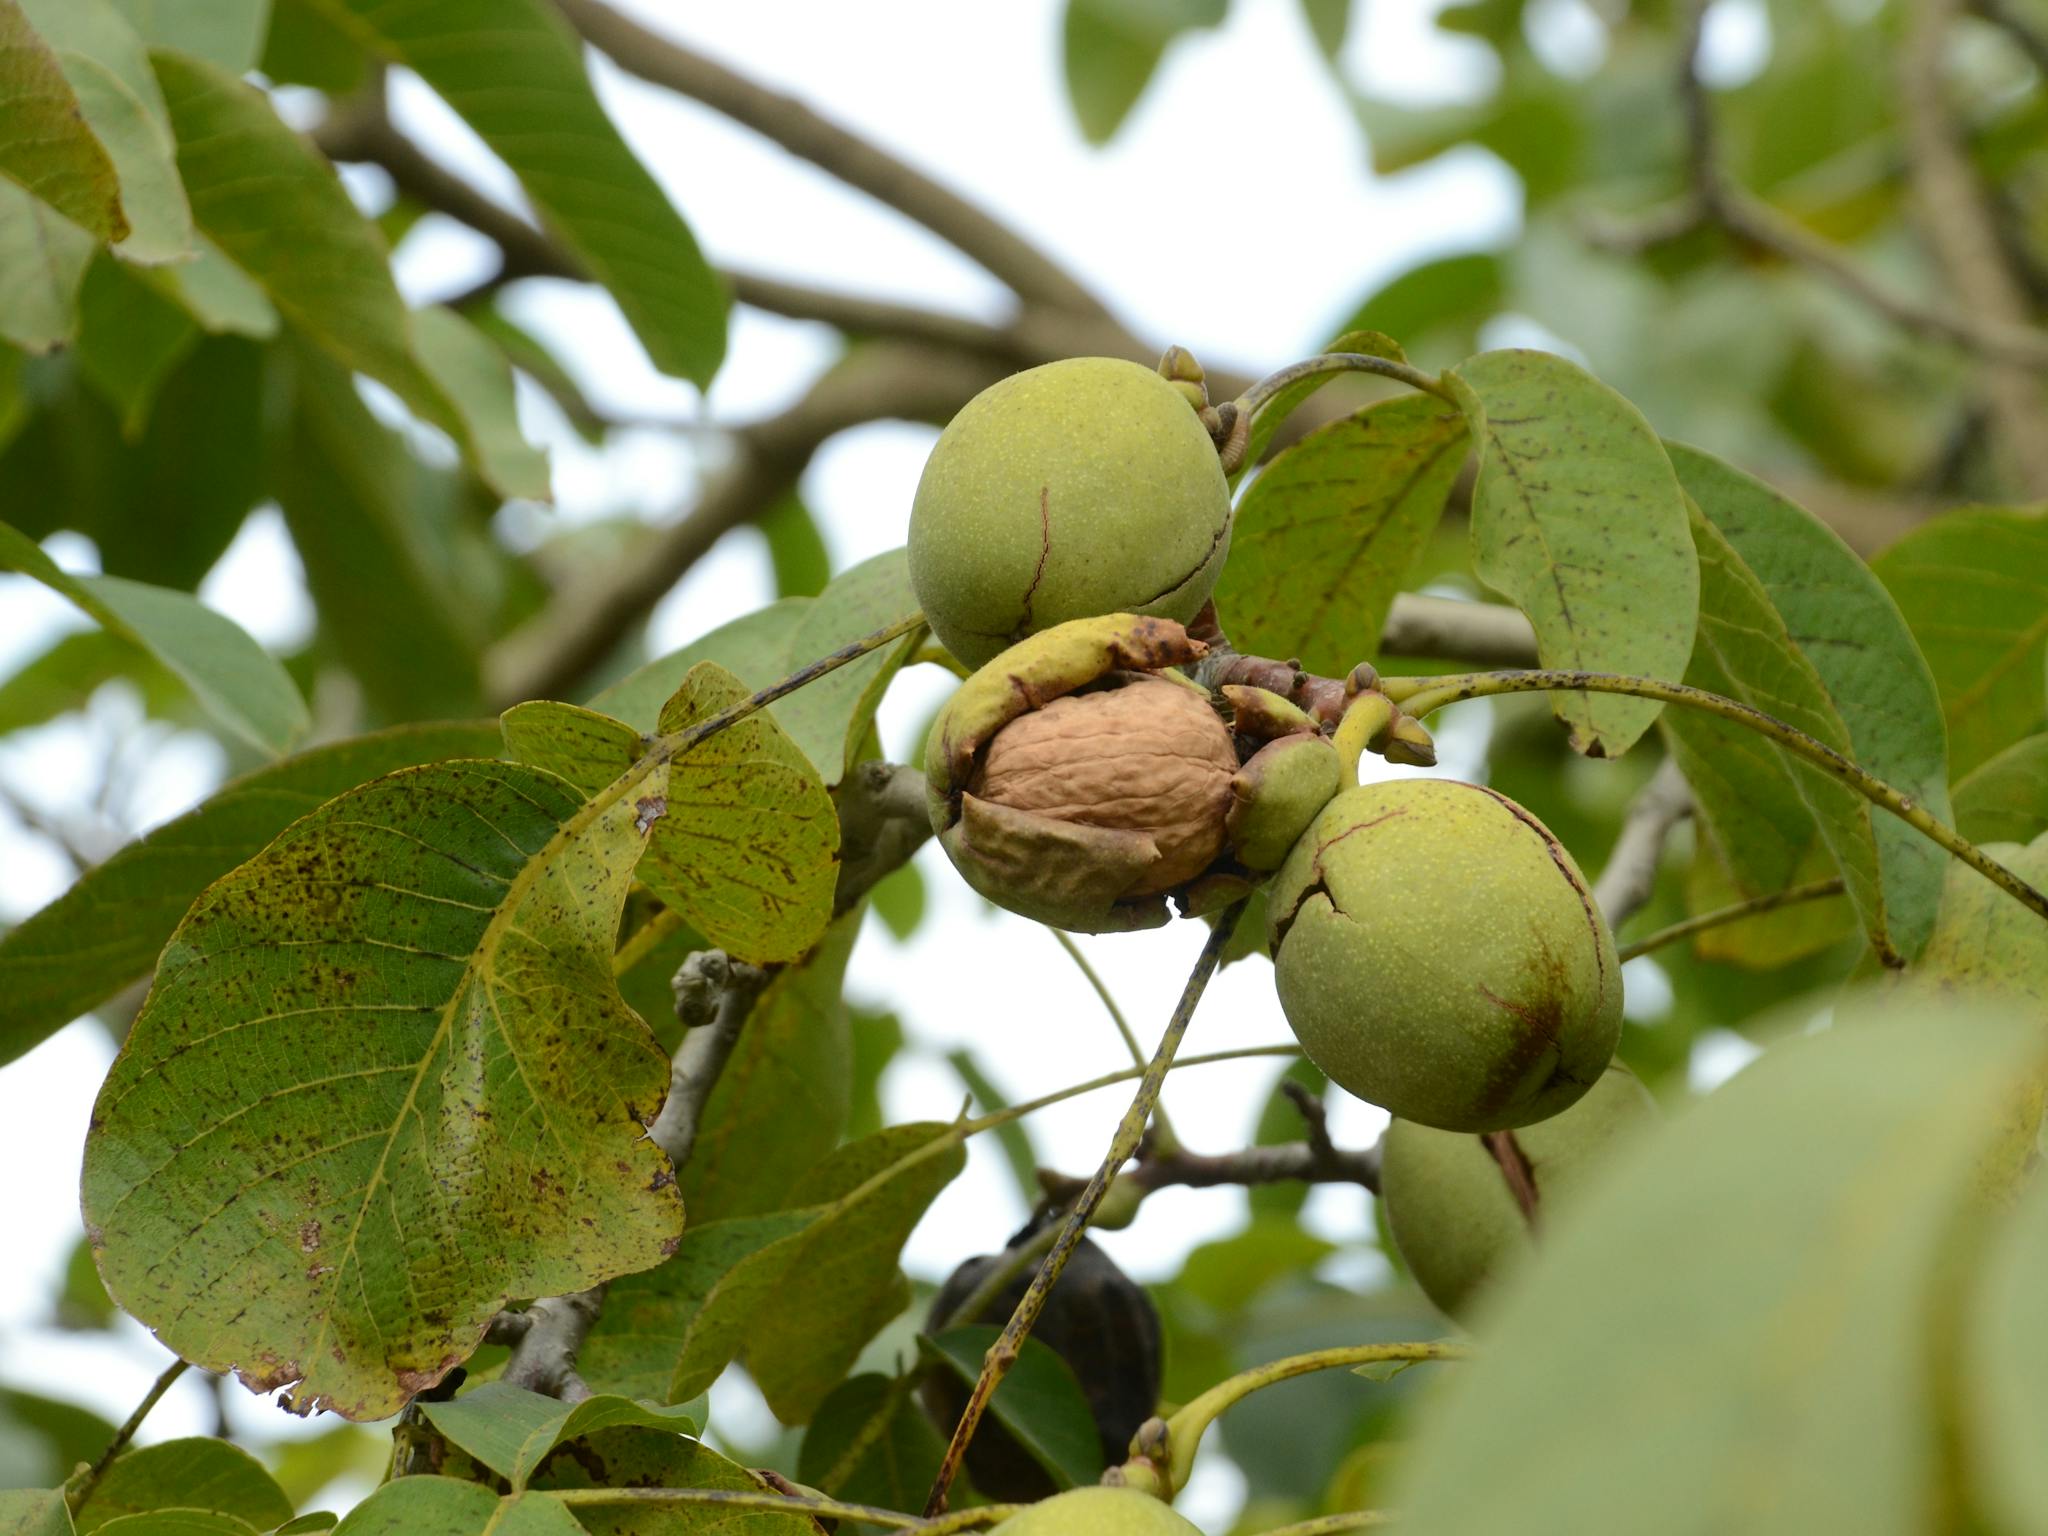 King Valley Walnuts growing on trees